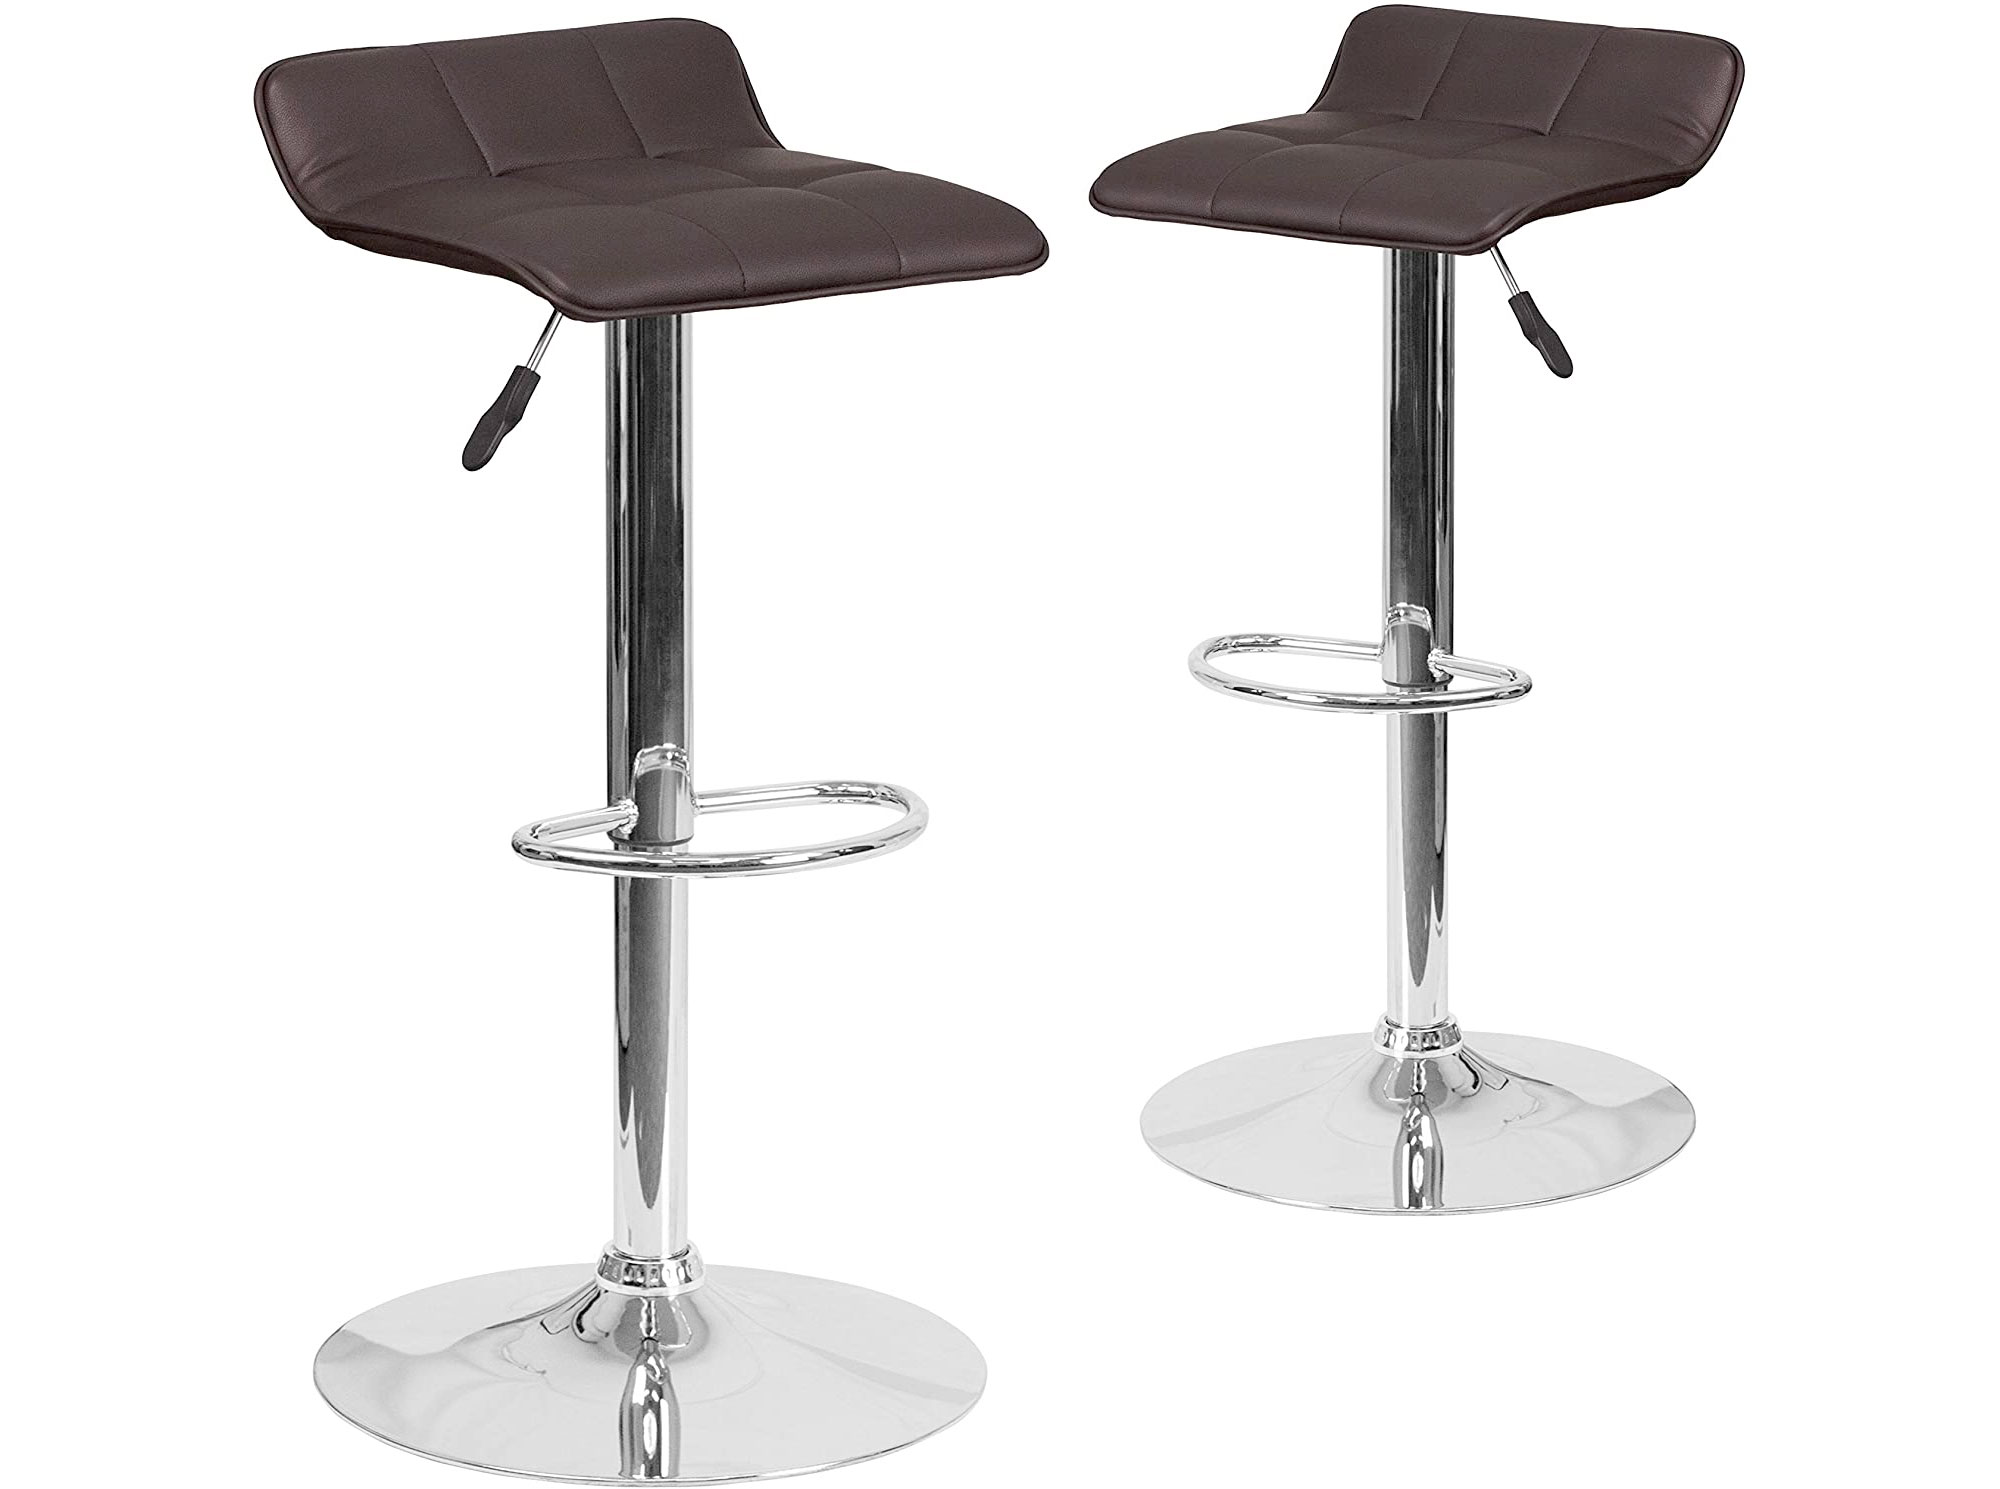 Amazon：Brown Vinyl Adjustable Height Barstool with Chrome Base and Footrest(2 pack)只賣$99.99